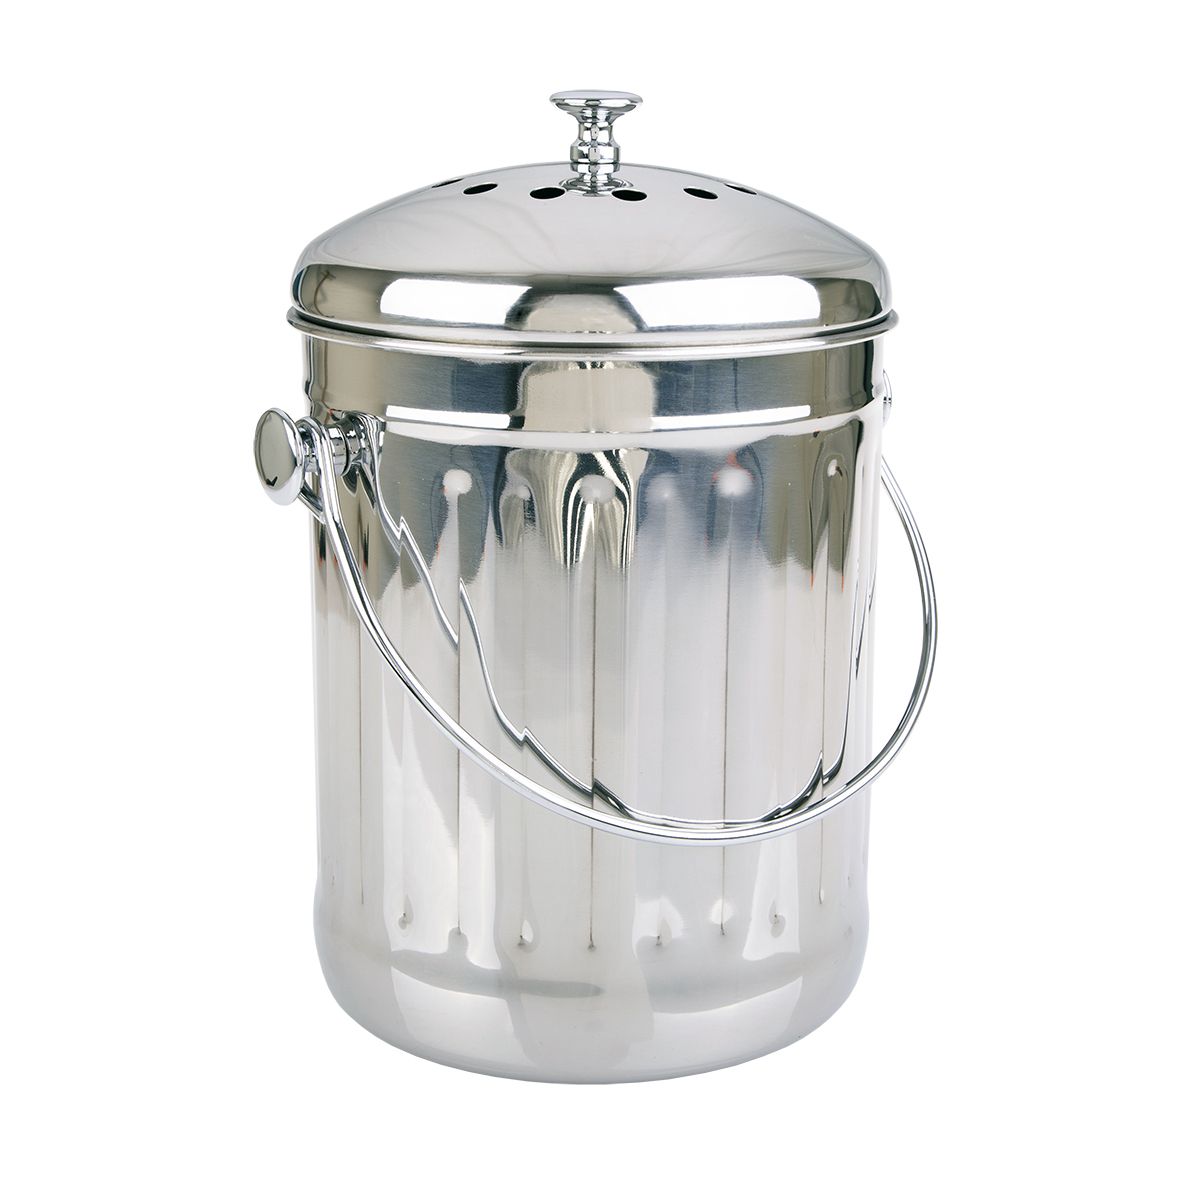 Appetito Compost Bin 4.5L - Stainless Steel